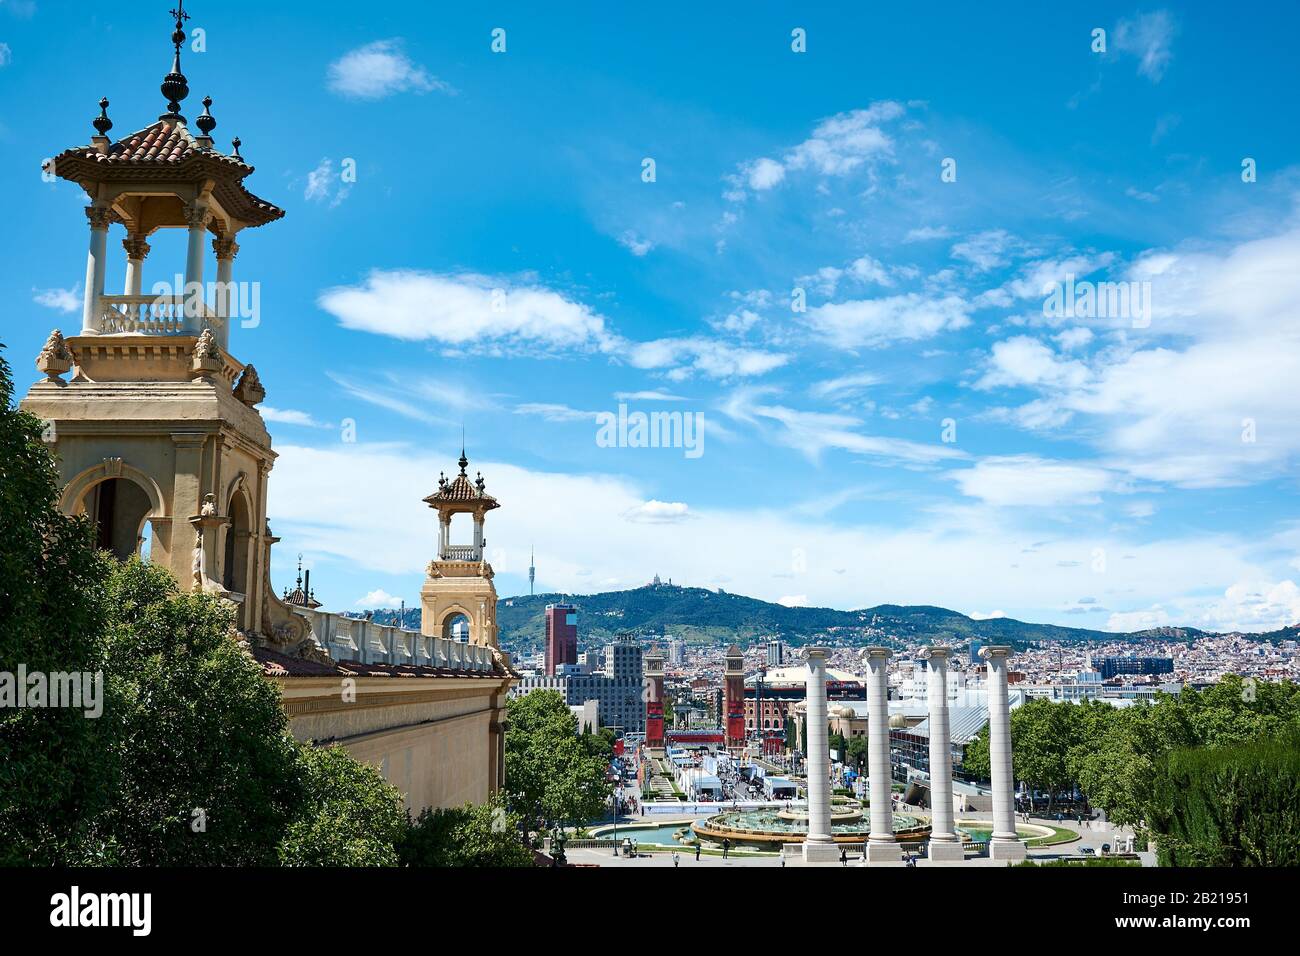 BARCELONA, SPAIN - MAY 13, 2017: View from Montjuic with towers surrounding the Palau Nacional, the Four Columns and the city of Barcelona. Venetian T Stock Photo